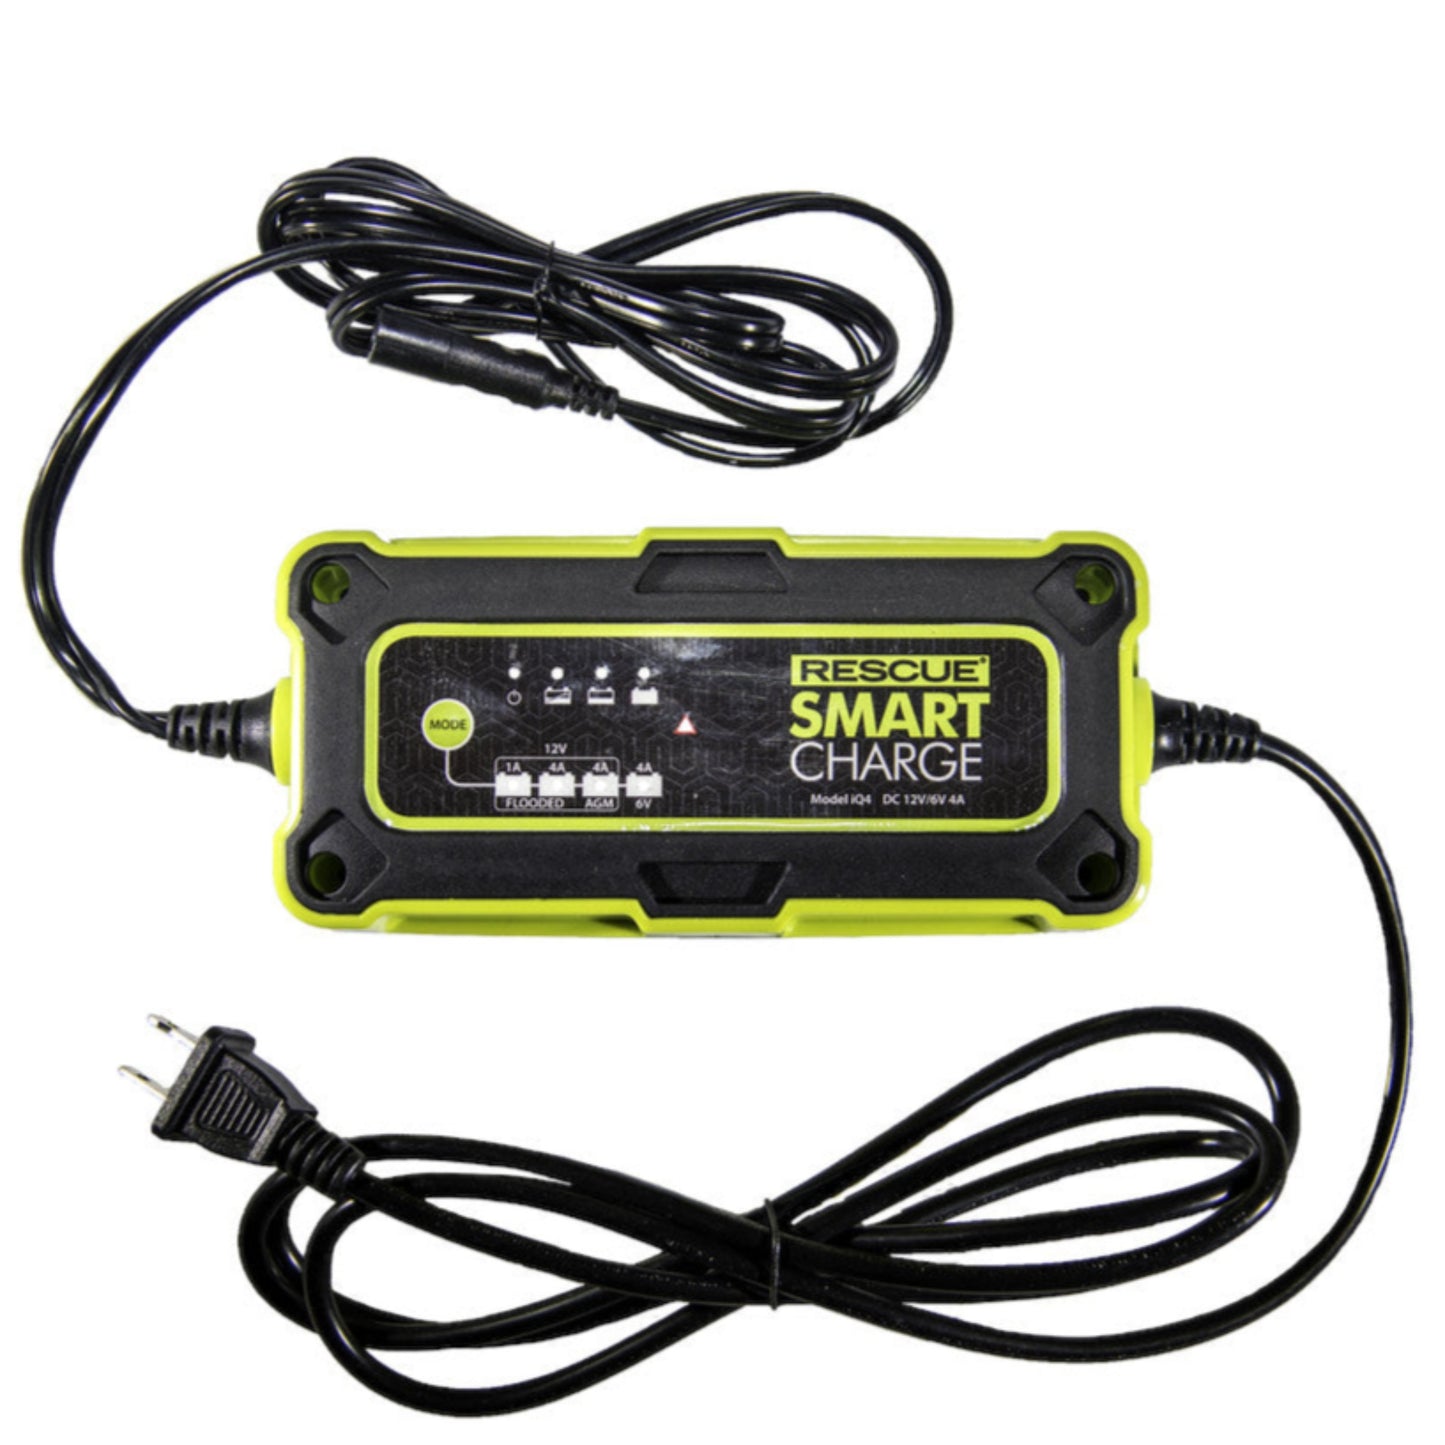 BATTERY MAINTAINER, 4AMP AUTOMATIC BATTERY CHARGER